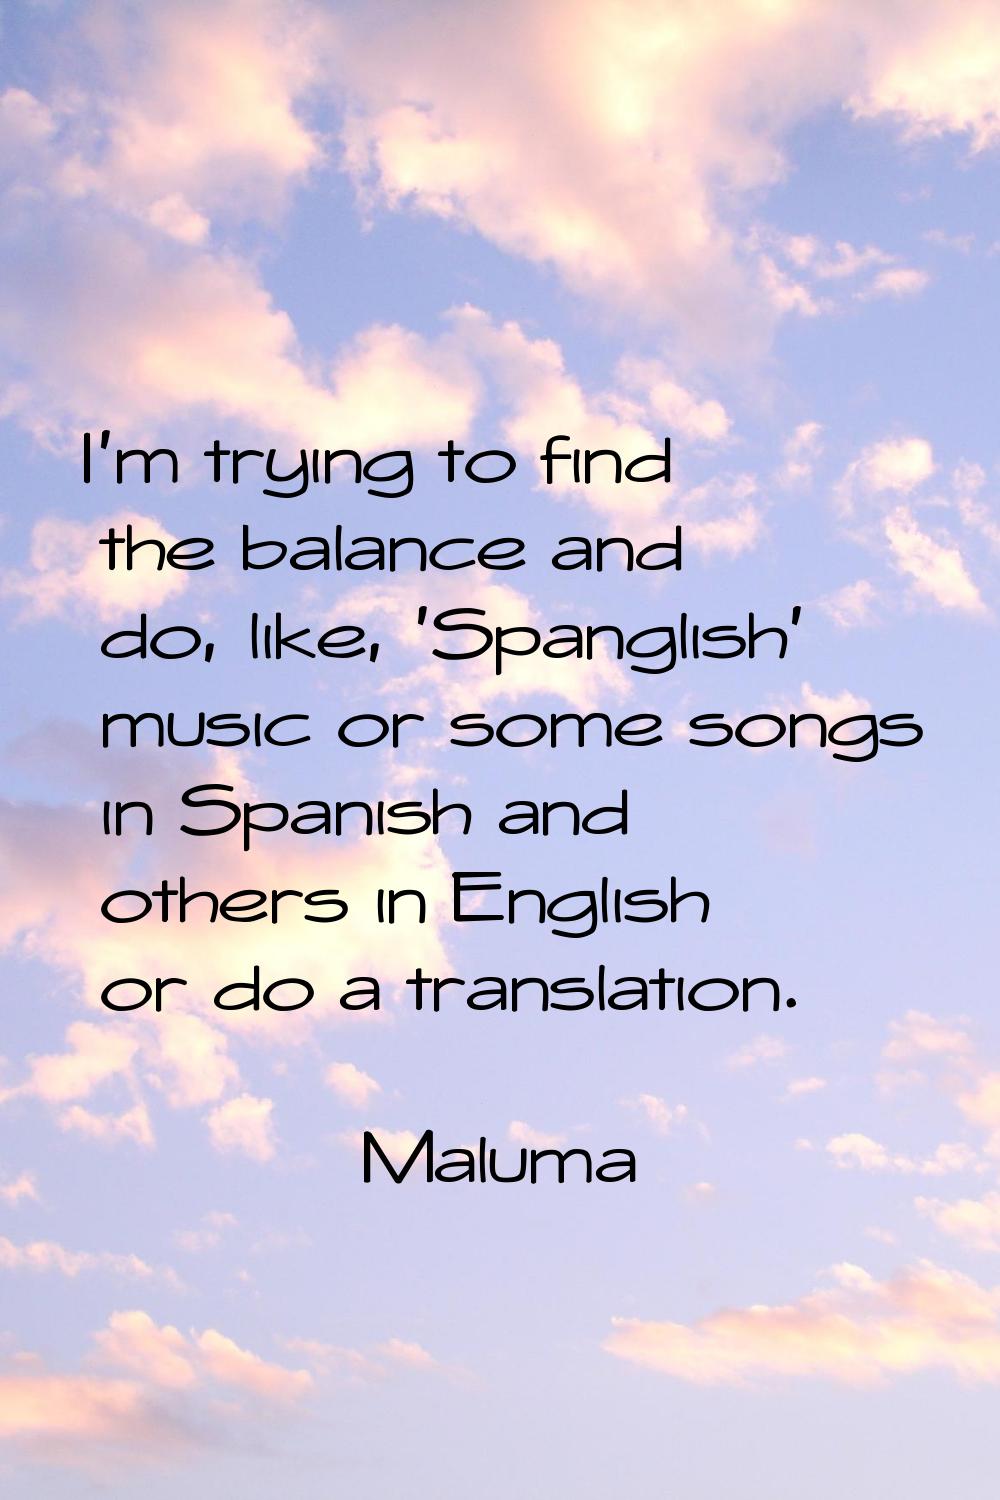 I'm trying to find the balance and do, like, 'Spanglish' music or some songs in Spanish and others 